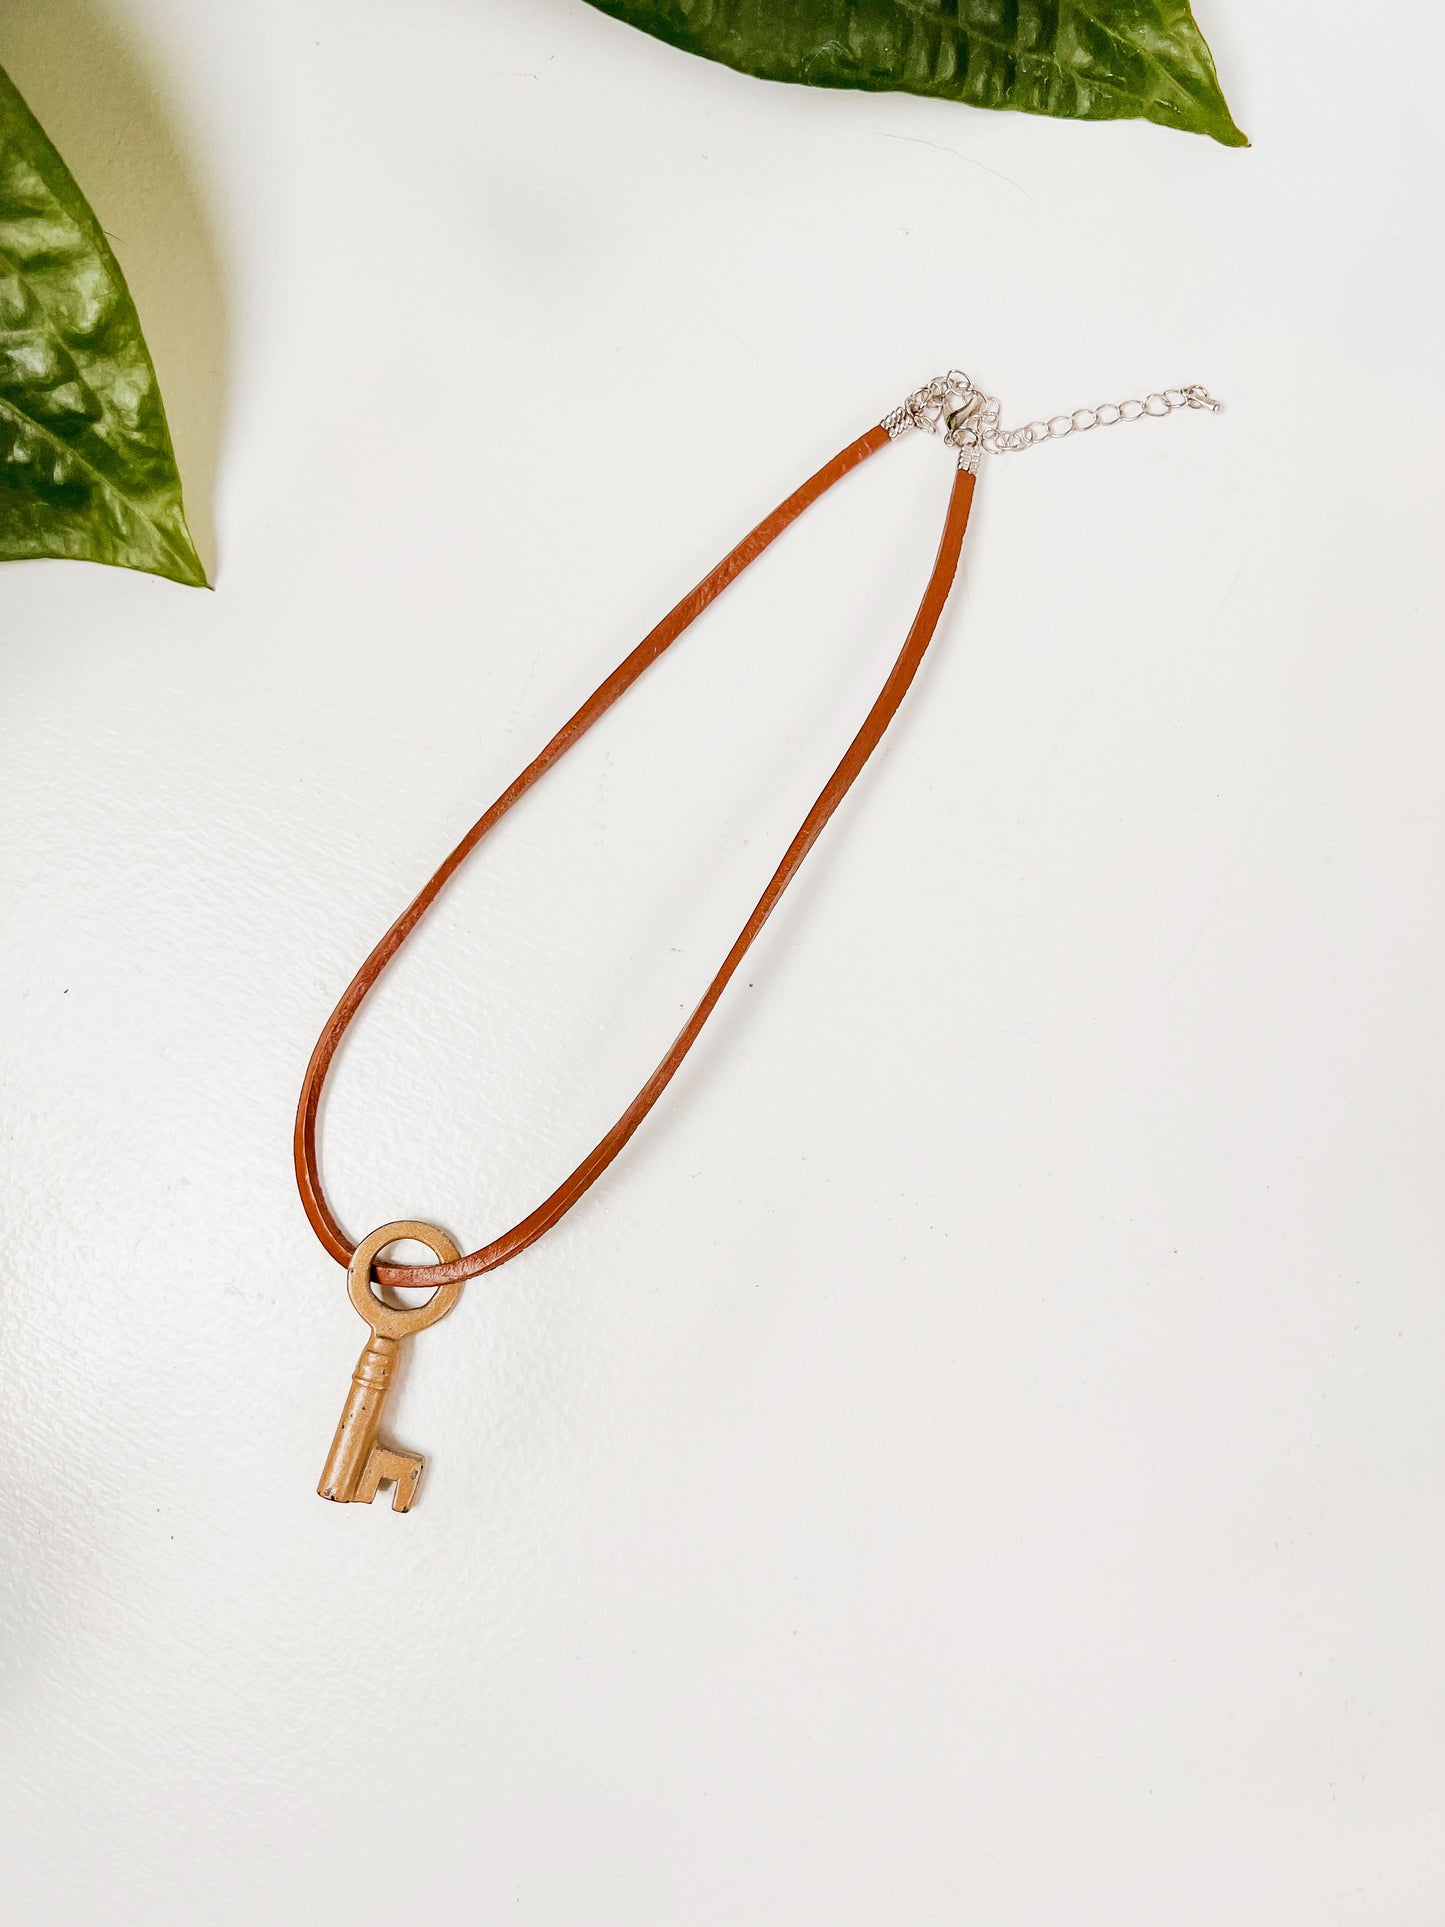 Antique Brass Skeleton Key with Brown Suede Choker